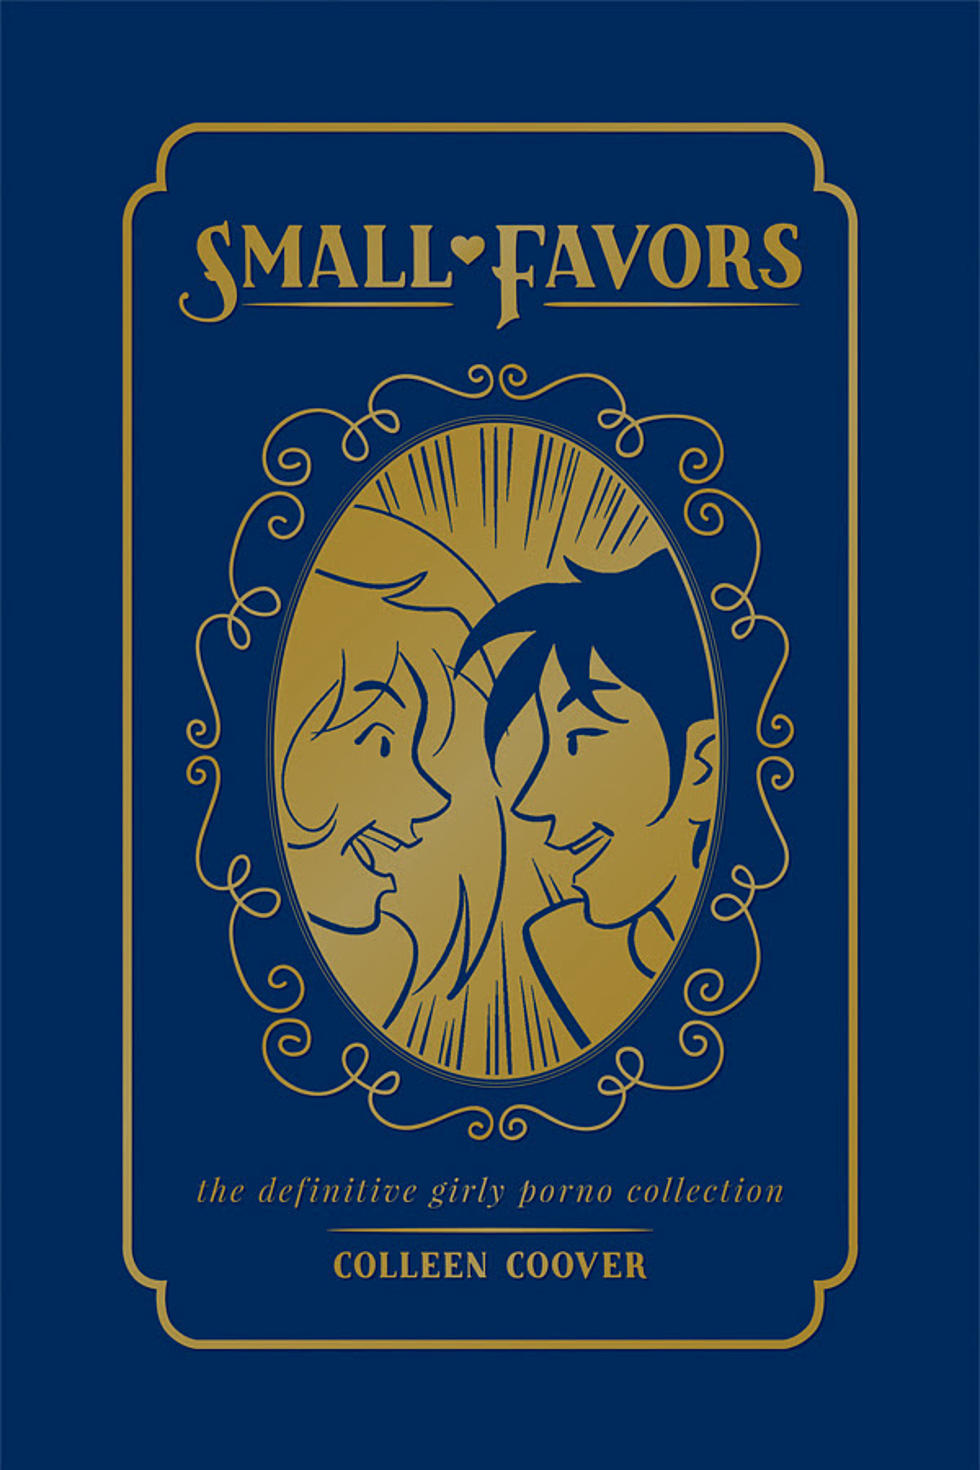 Colleen Coover&#8217;s Erotic Comedy &#8216;Small Favors&#8217; Coming In Hardcover From Limerence Press